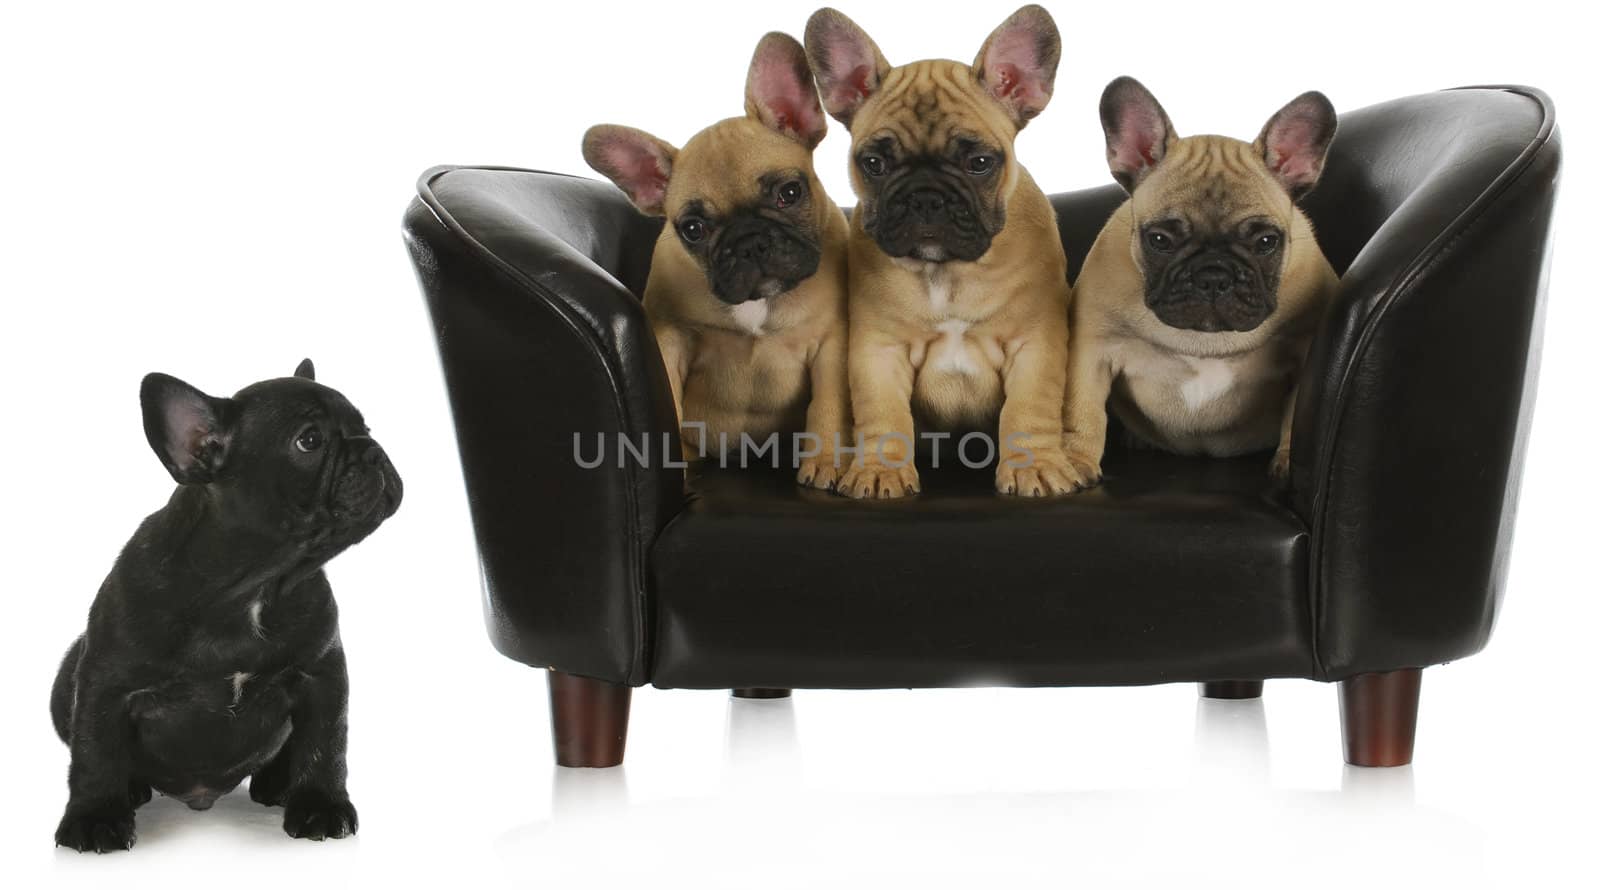 concept of bullying - three similar french bulldogs sitting together on dog couch while different one is separated isolated on white background